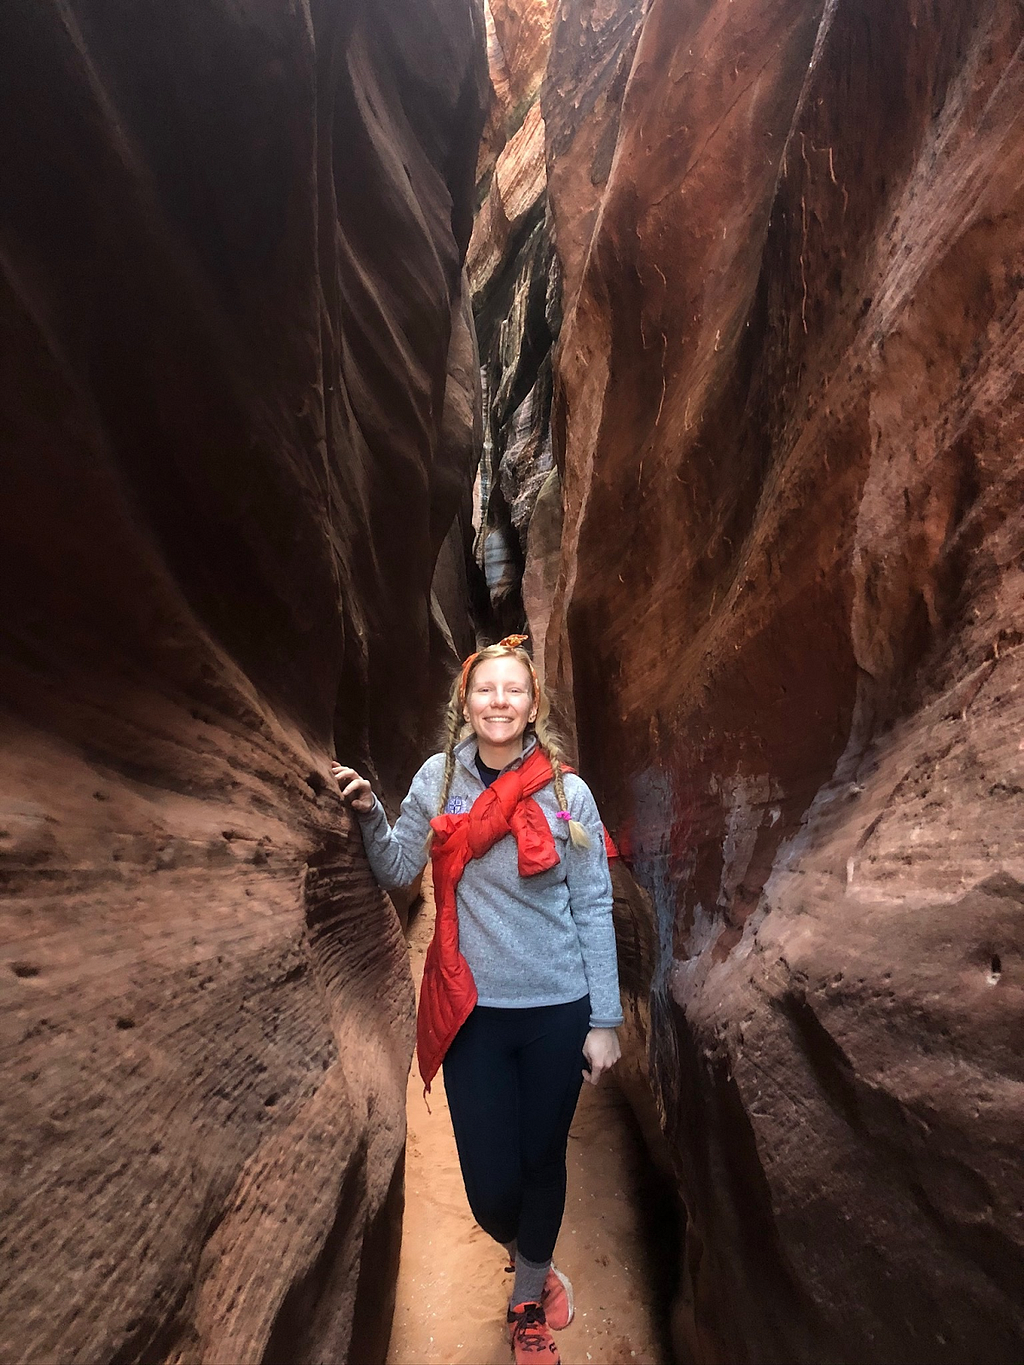 Laura stands in a slot canyon in Arizona, one week before quarantine!